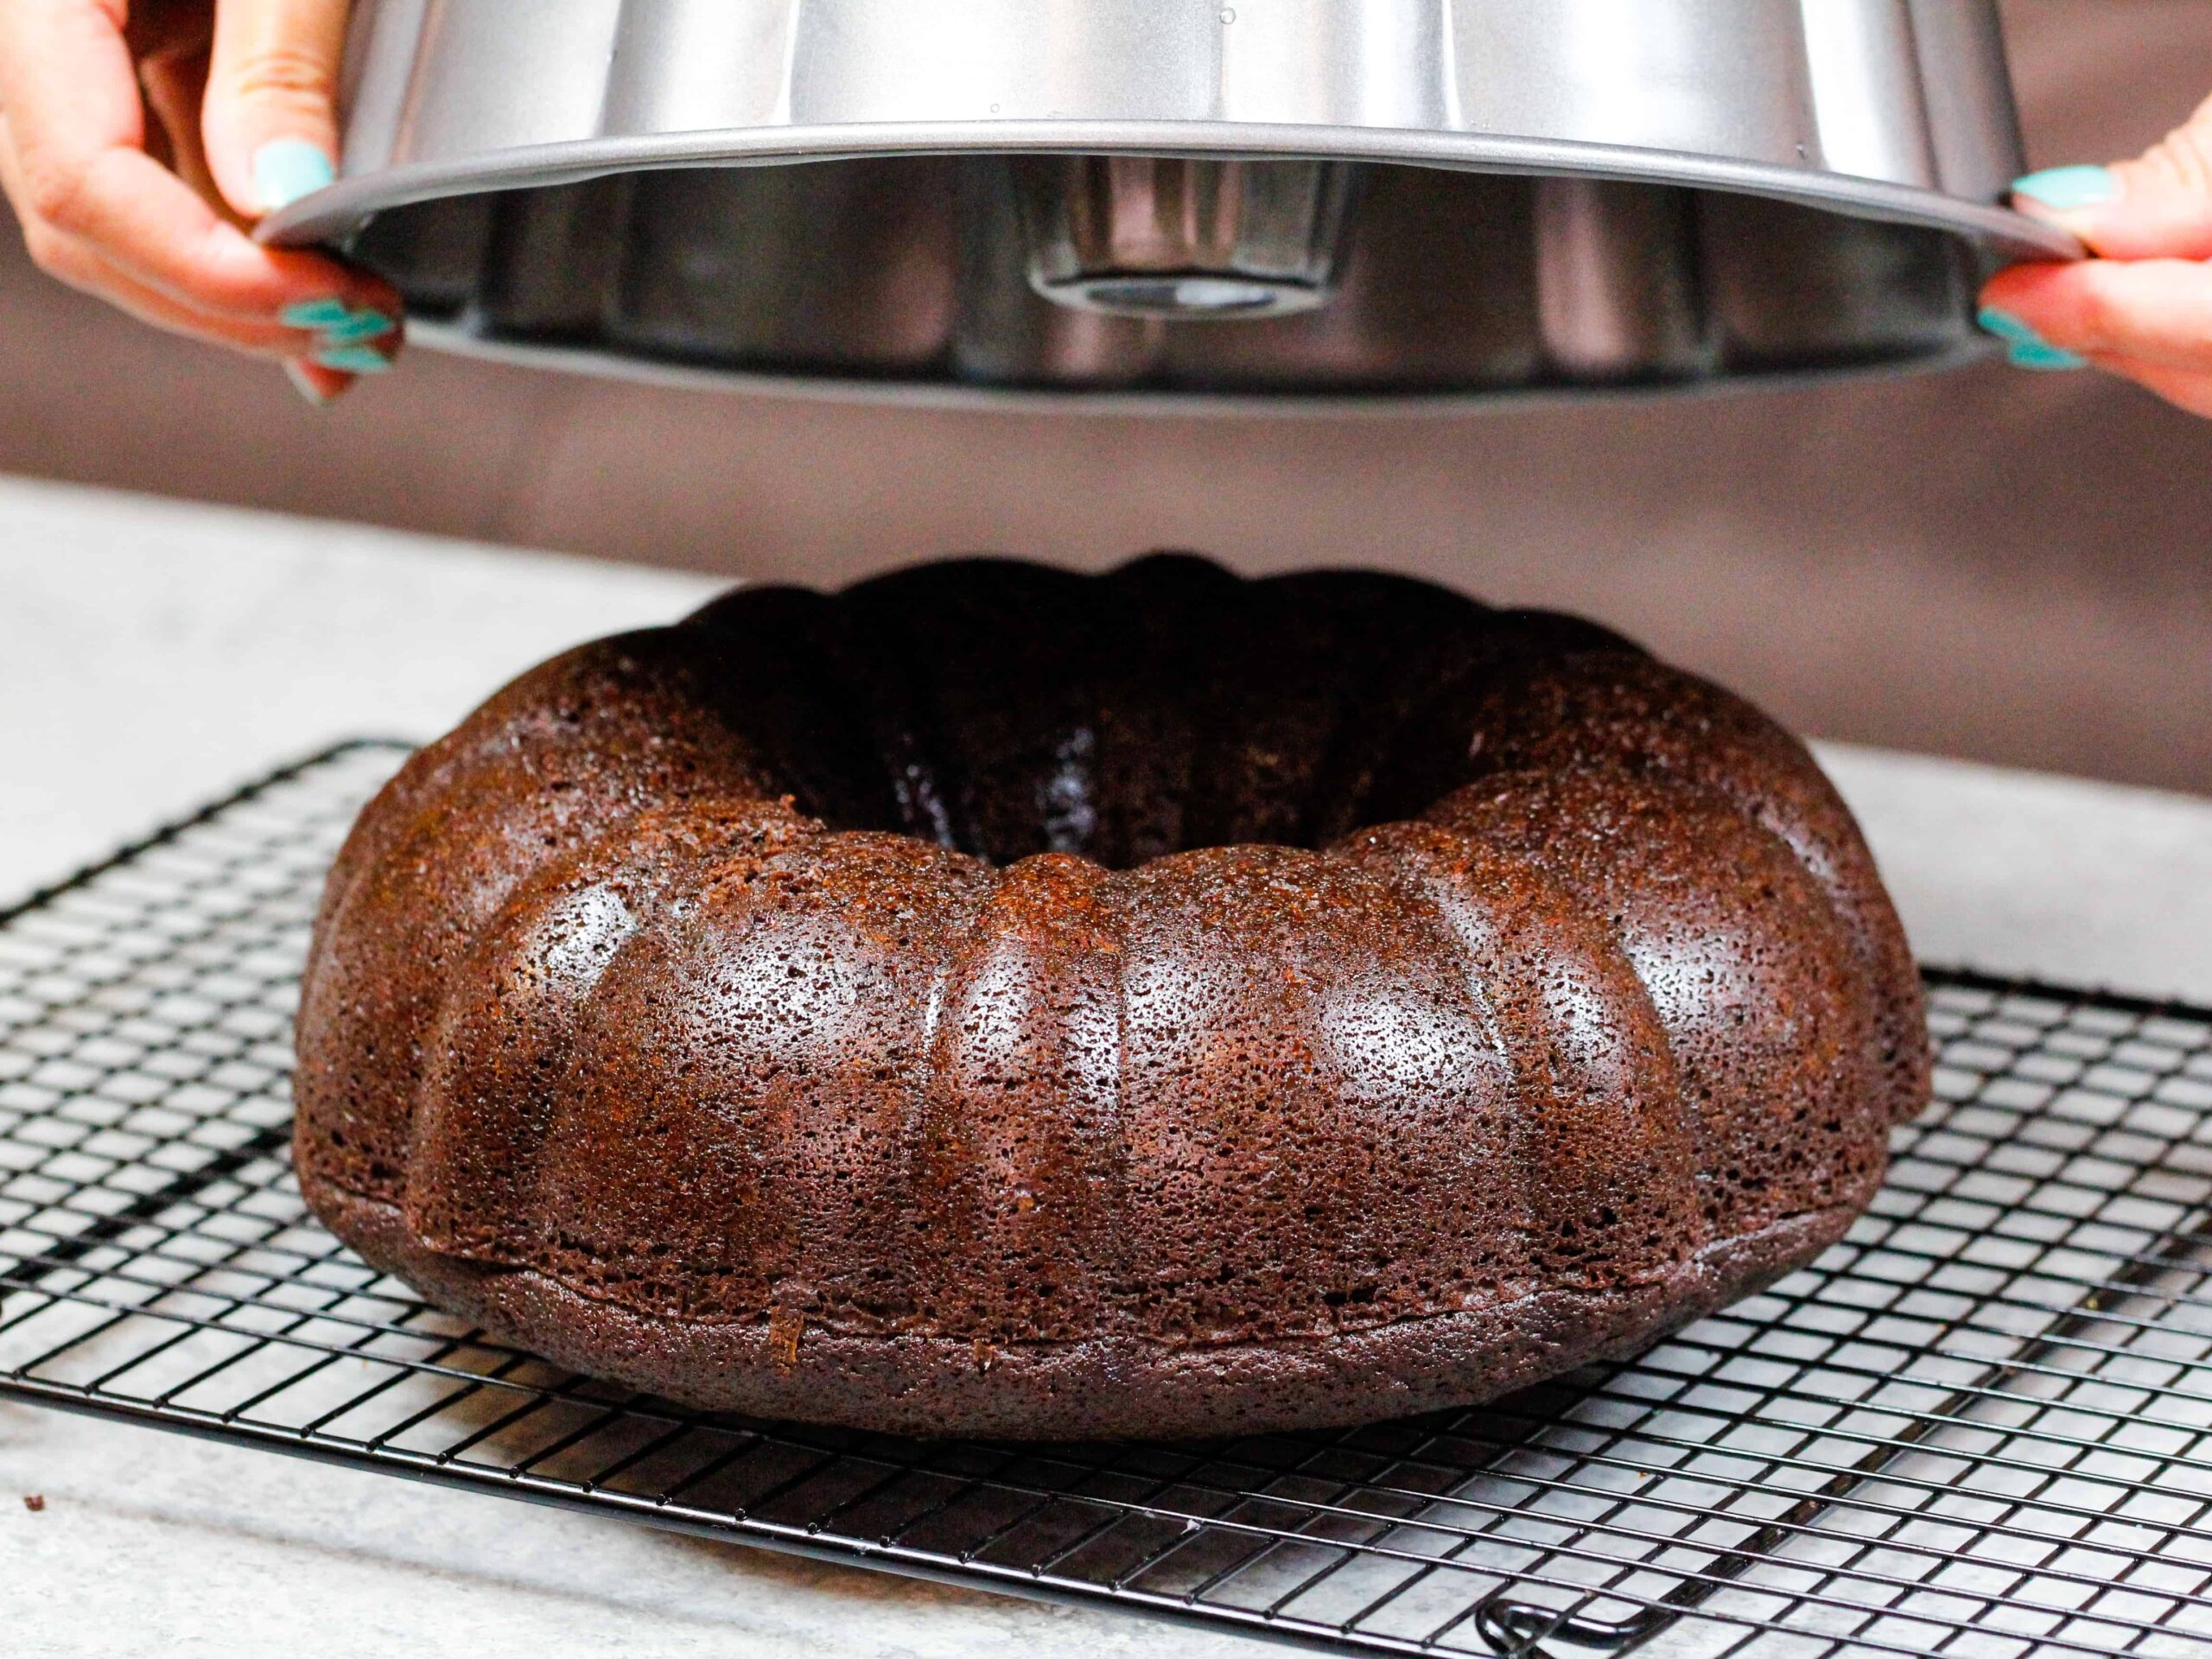 image of a bundt cake easily releasing from a bundt pan that was properly greased